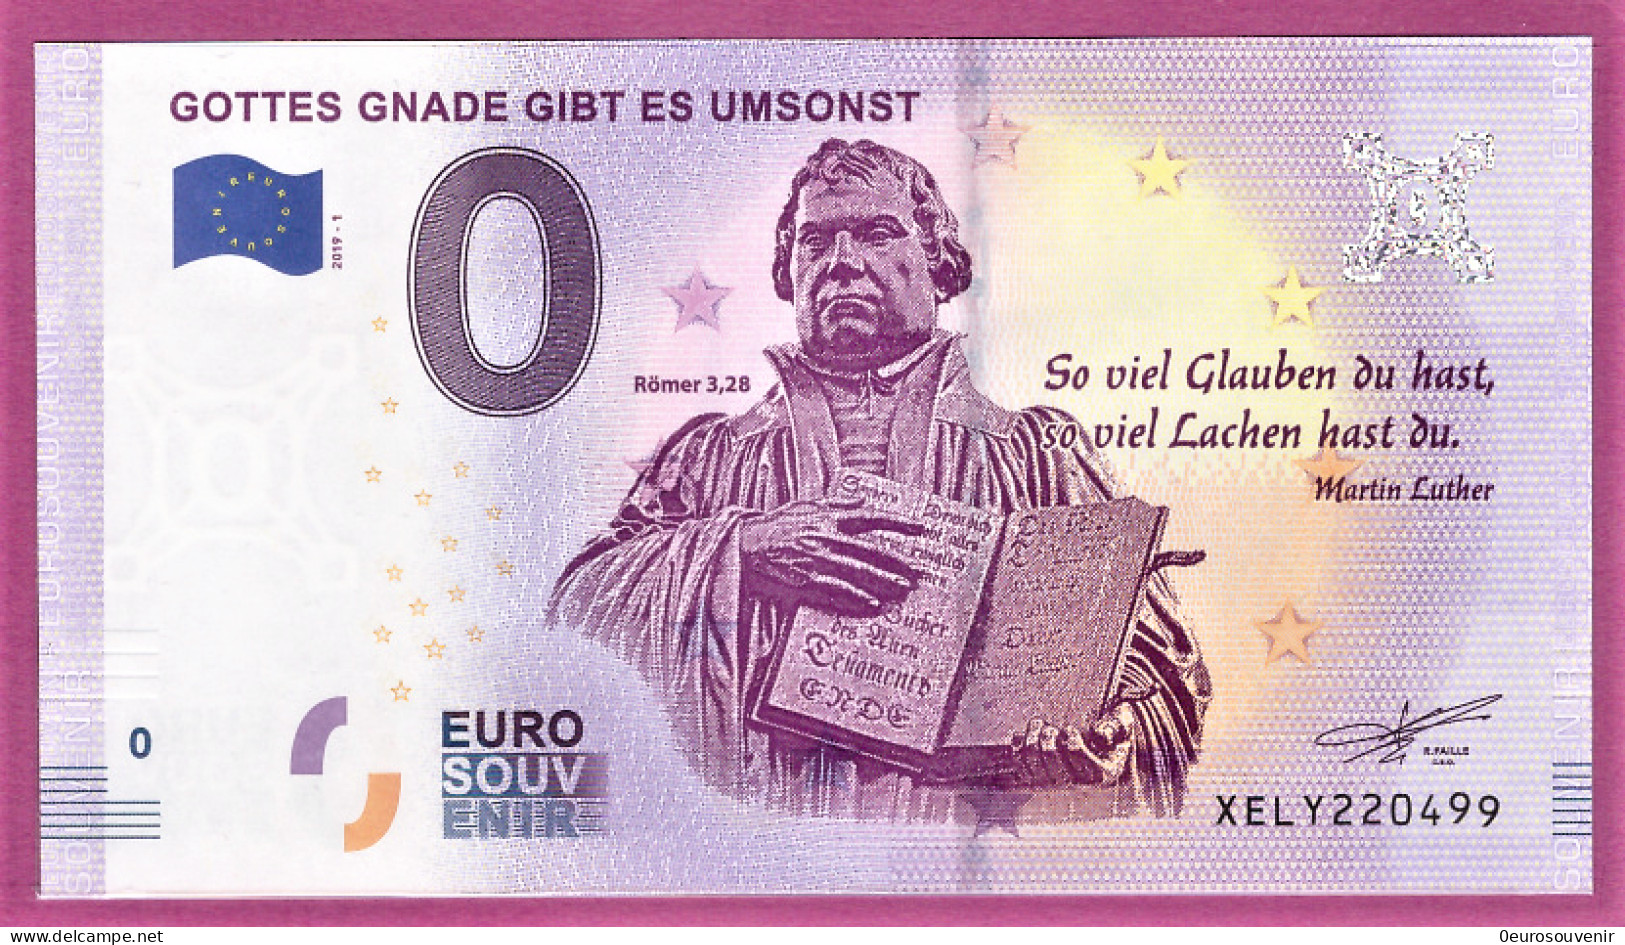 0-Euro XELY 01 2019  GOTTES GNADE GIBT ES UMSONST - MARTIN LUTHER - Private Proofs / Unofficial